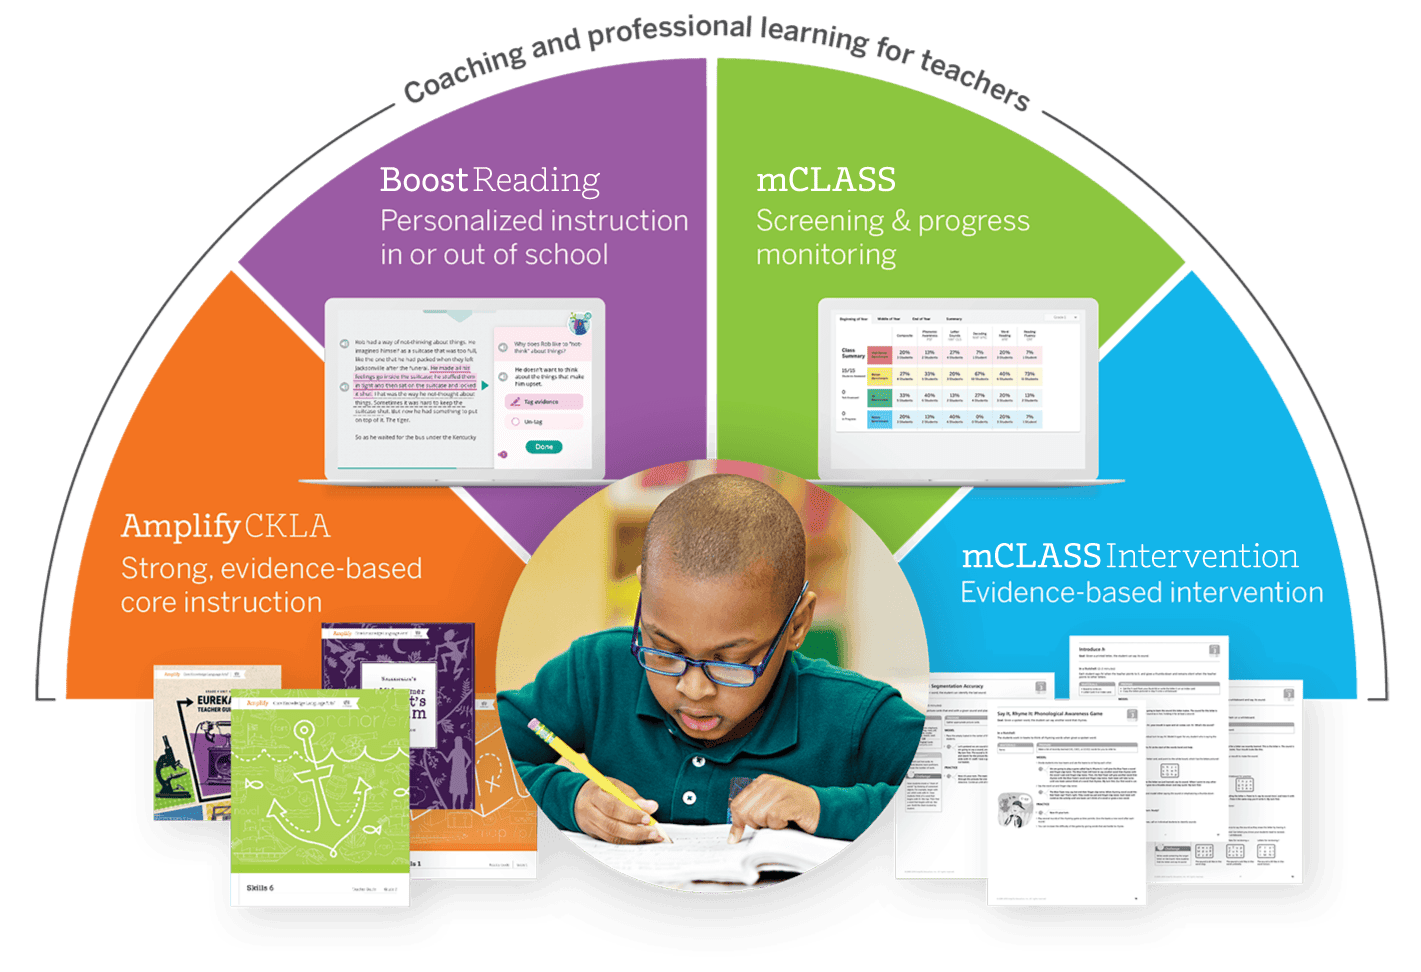 An educational graphic showing a young boy studying, surrounded by diagrams of various literacy programs and tools like mClass and Amplify CKLA, funded by stimulus funding for schools.